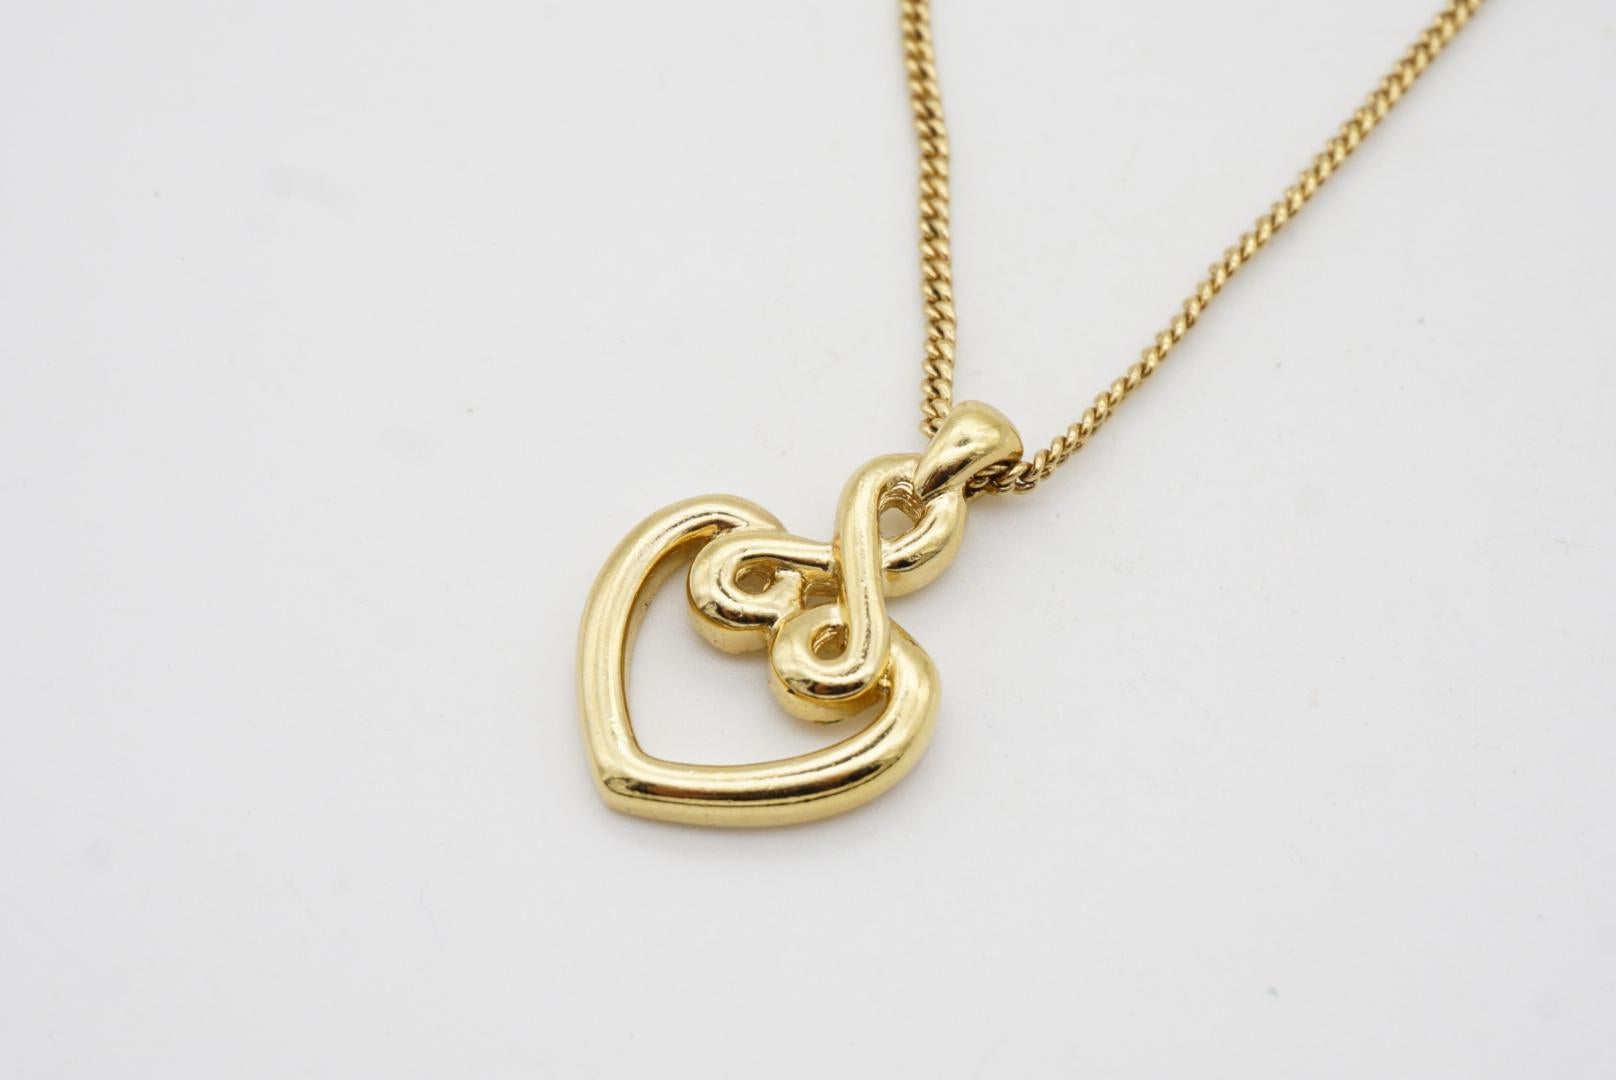 Christian Dior Vintage 1990s Baroque Heart Love Knot Openwork Pendant Necklace For Sale 4